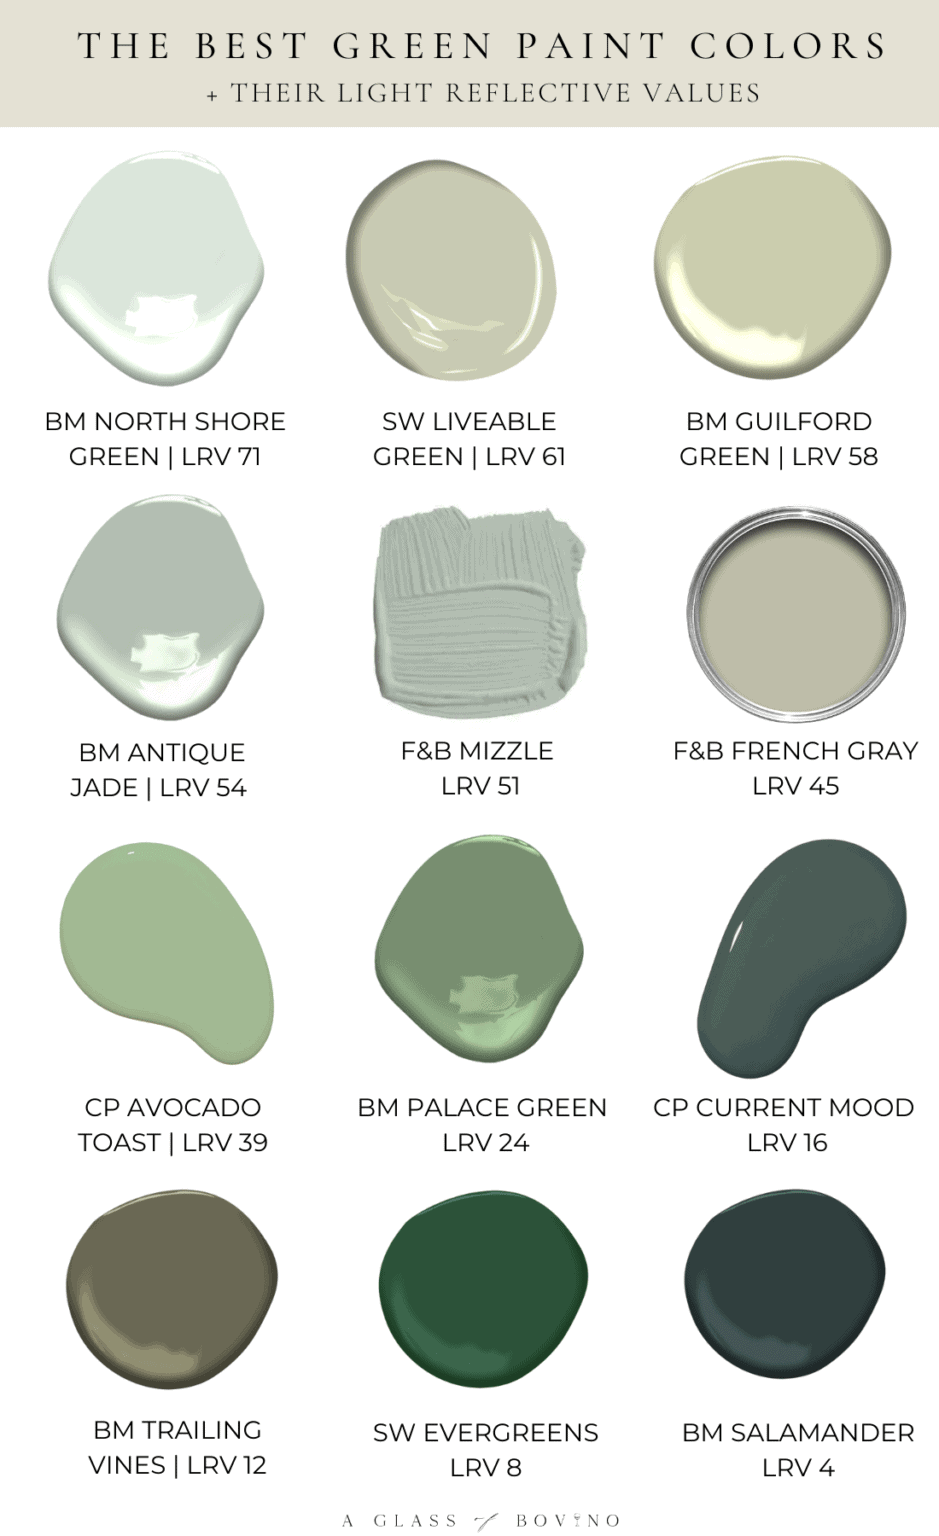 THE BEST GREEN PAINT COLORS - A Glass of Bovino